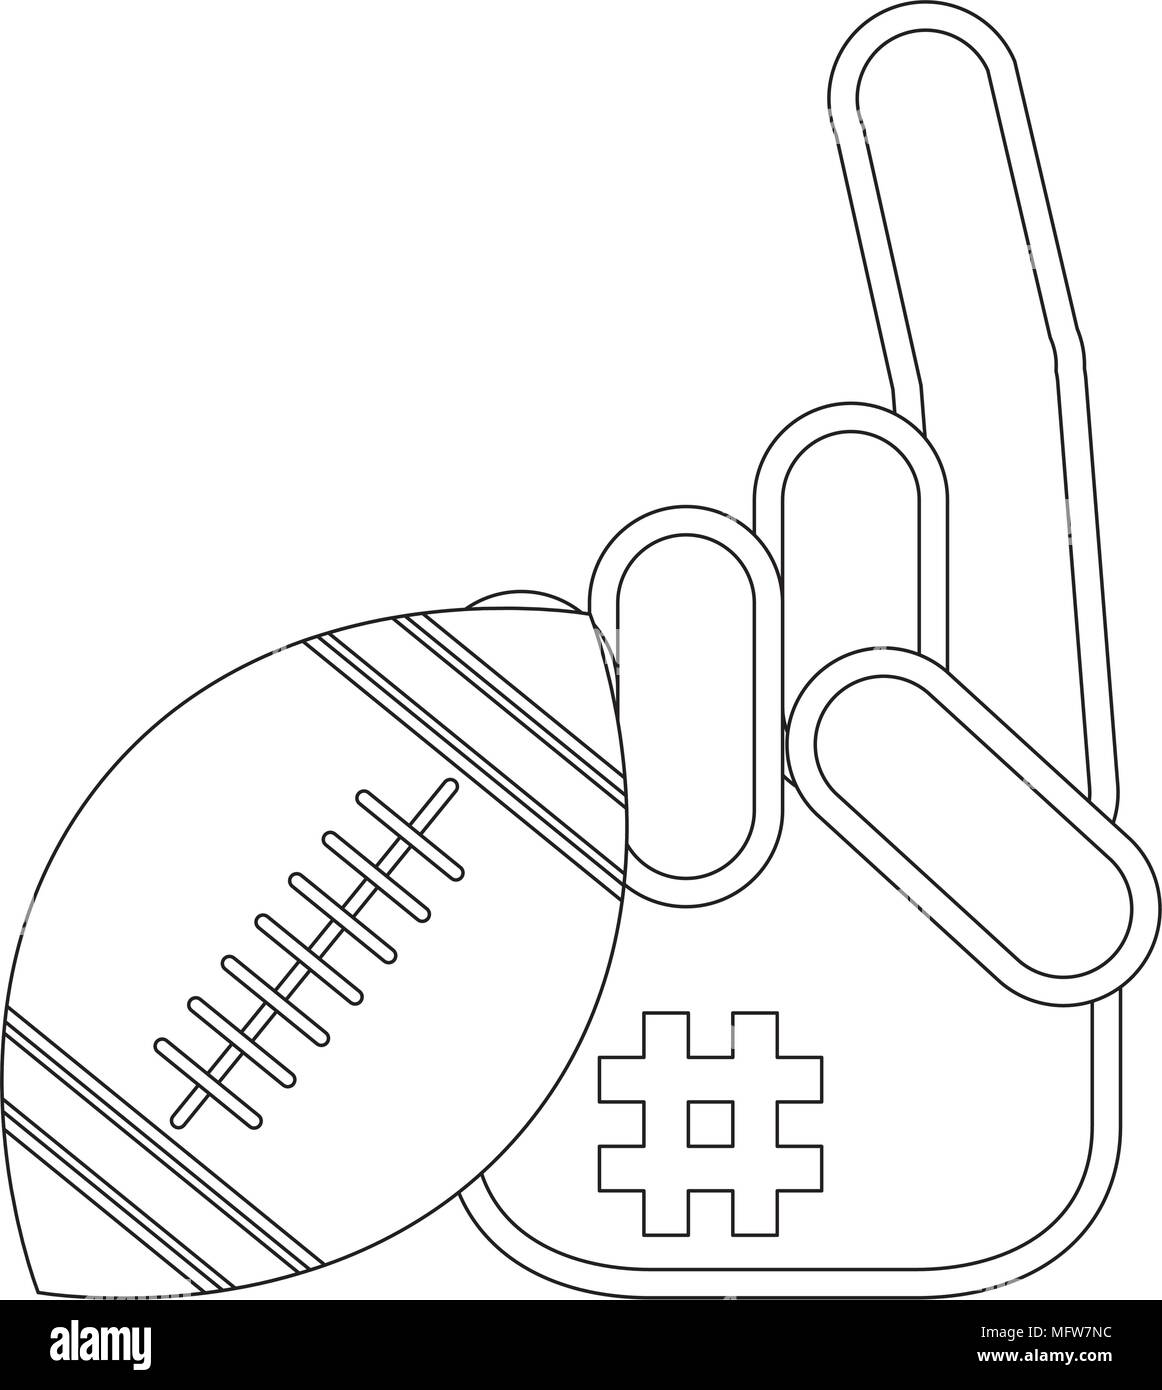 american football ball and sport fan glove icon over white background, vector illustration Stock Vector